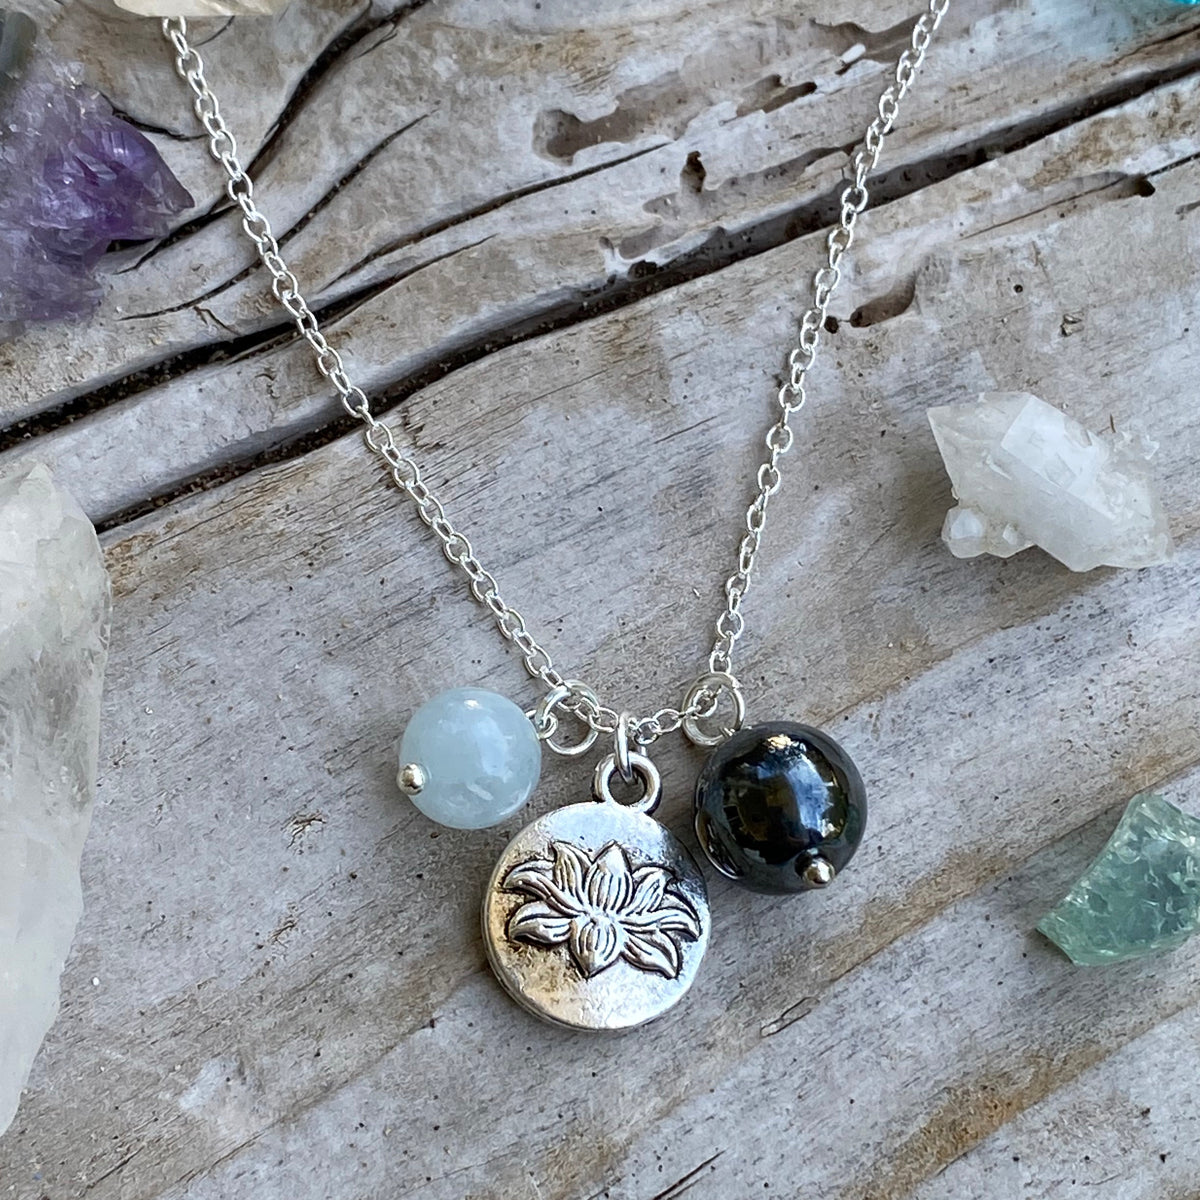 Lotus Charm Necklace with with Hematite and Aquamarine